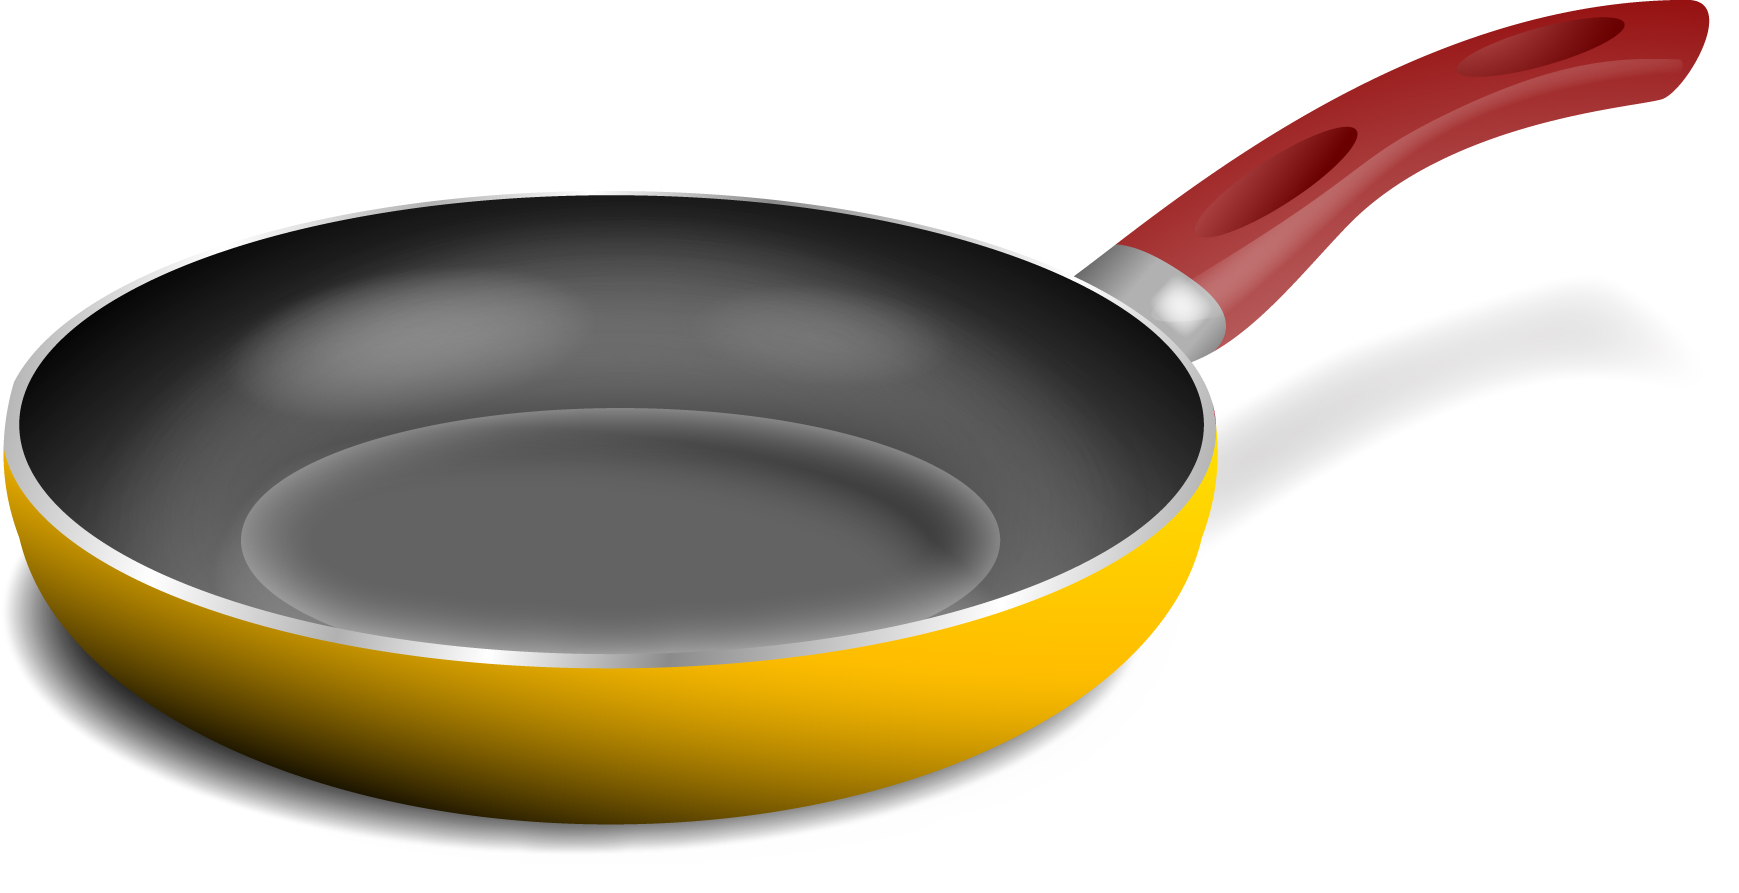 Frying Pan Pictures - ClipArt Best